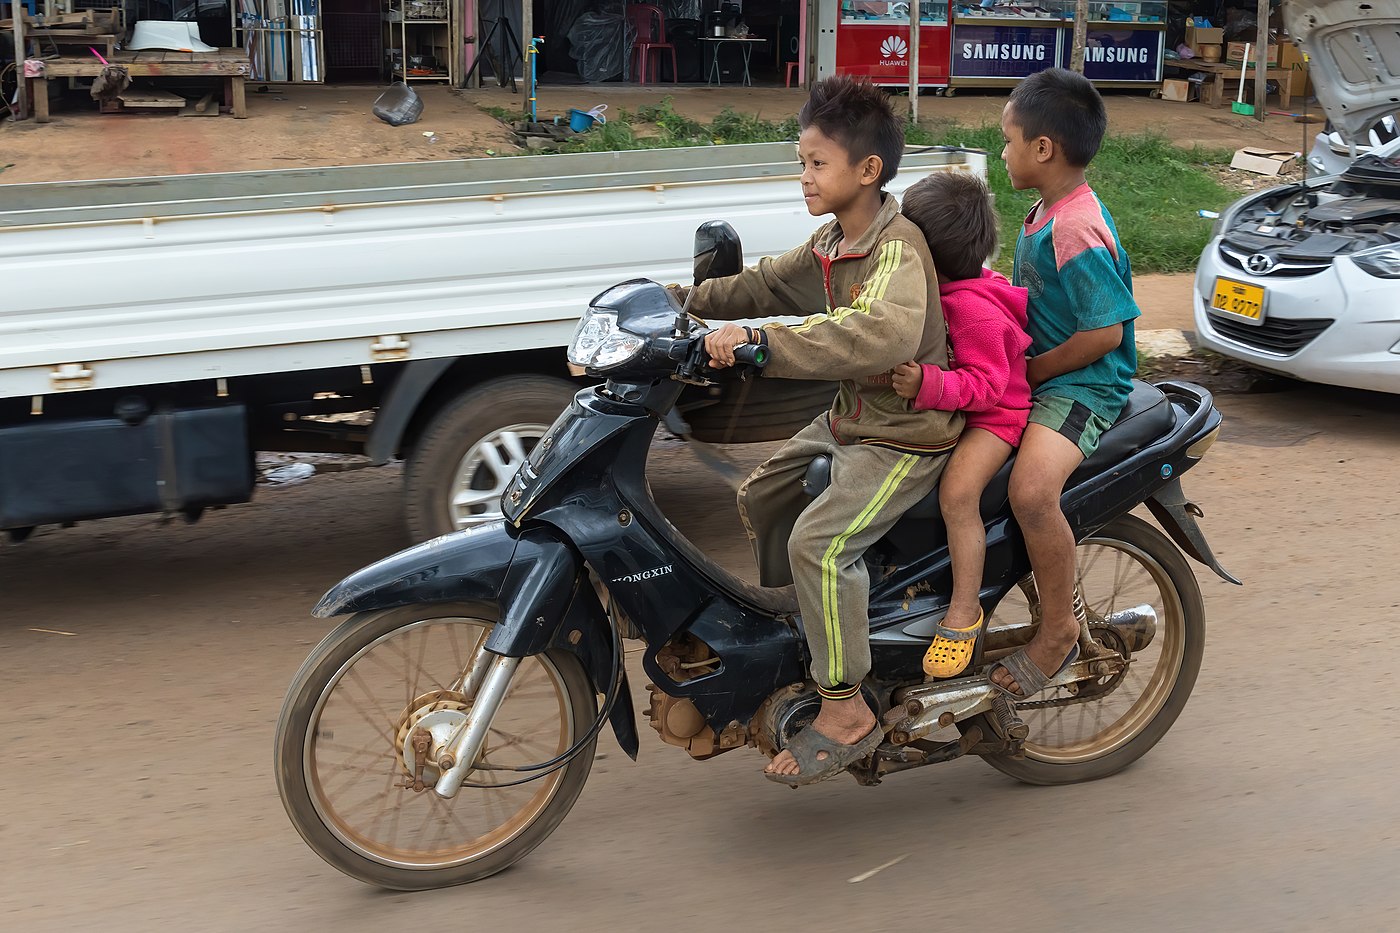 Boy riding a motorcycle with two other young children